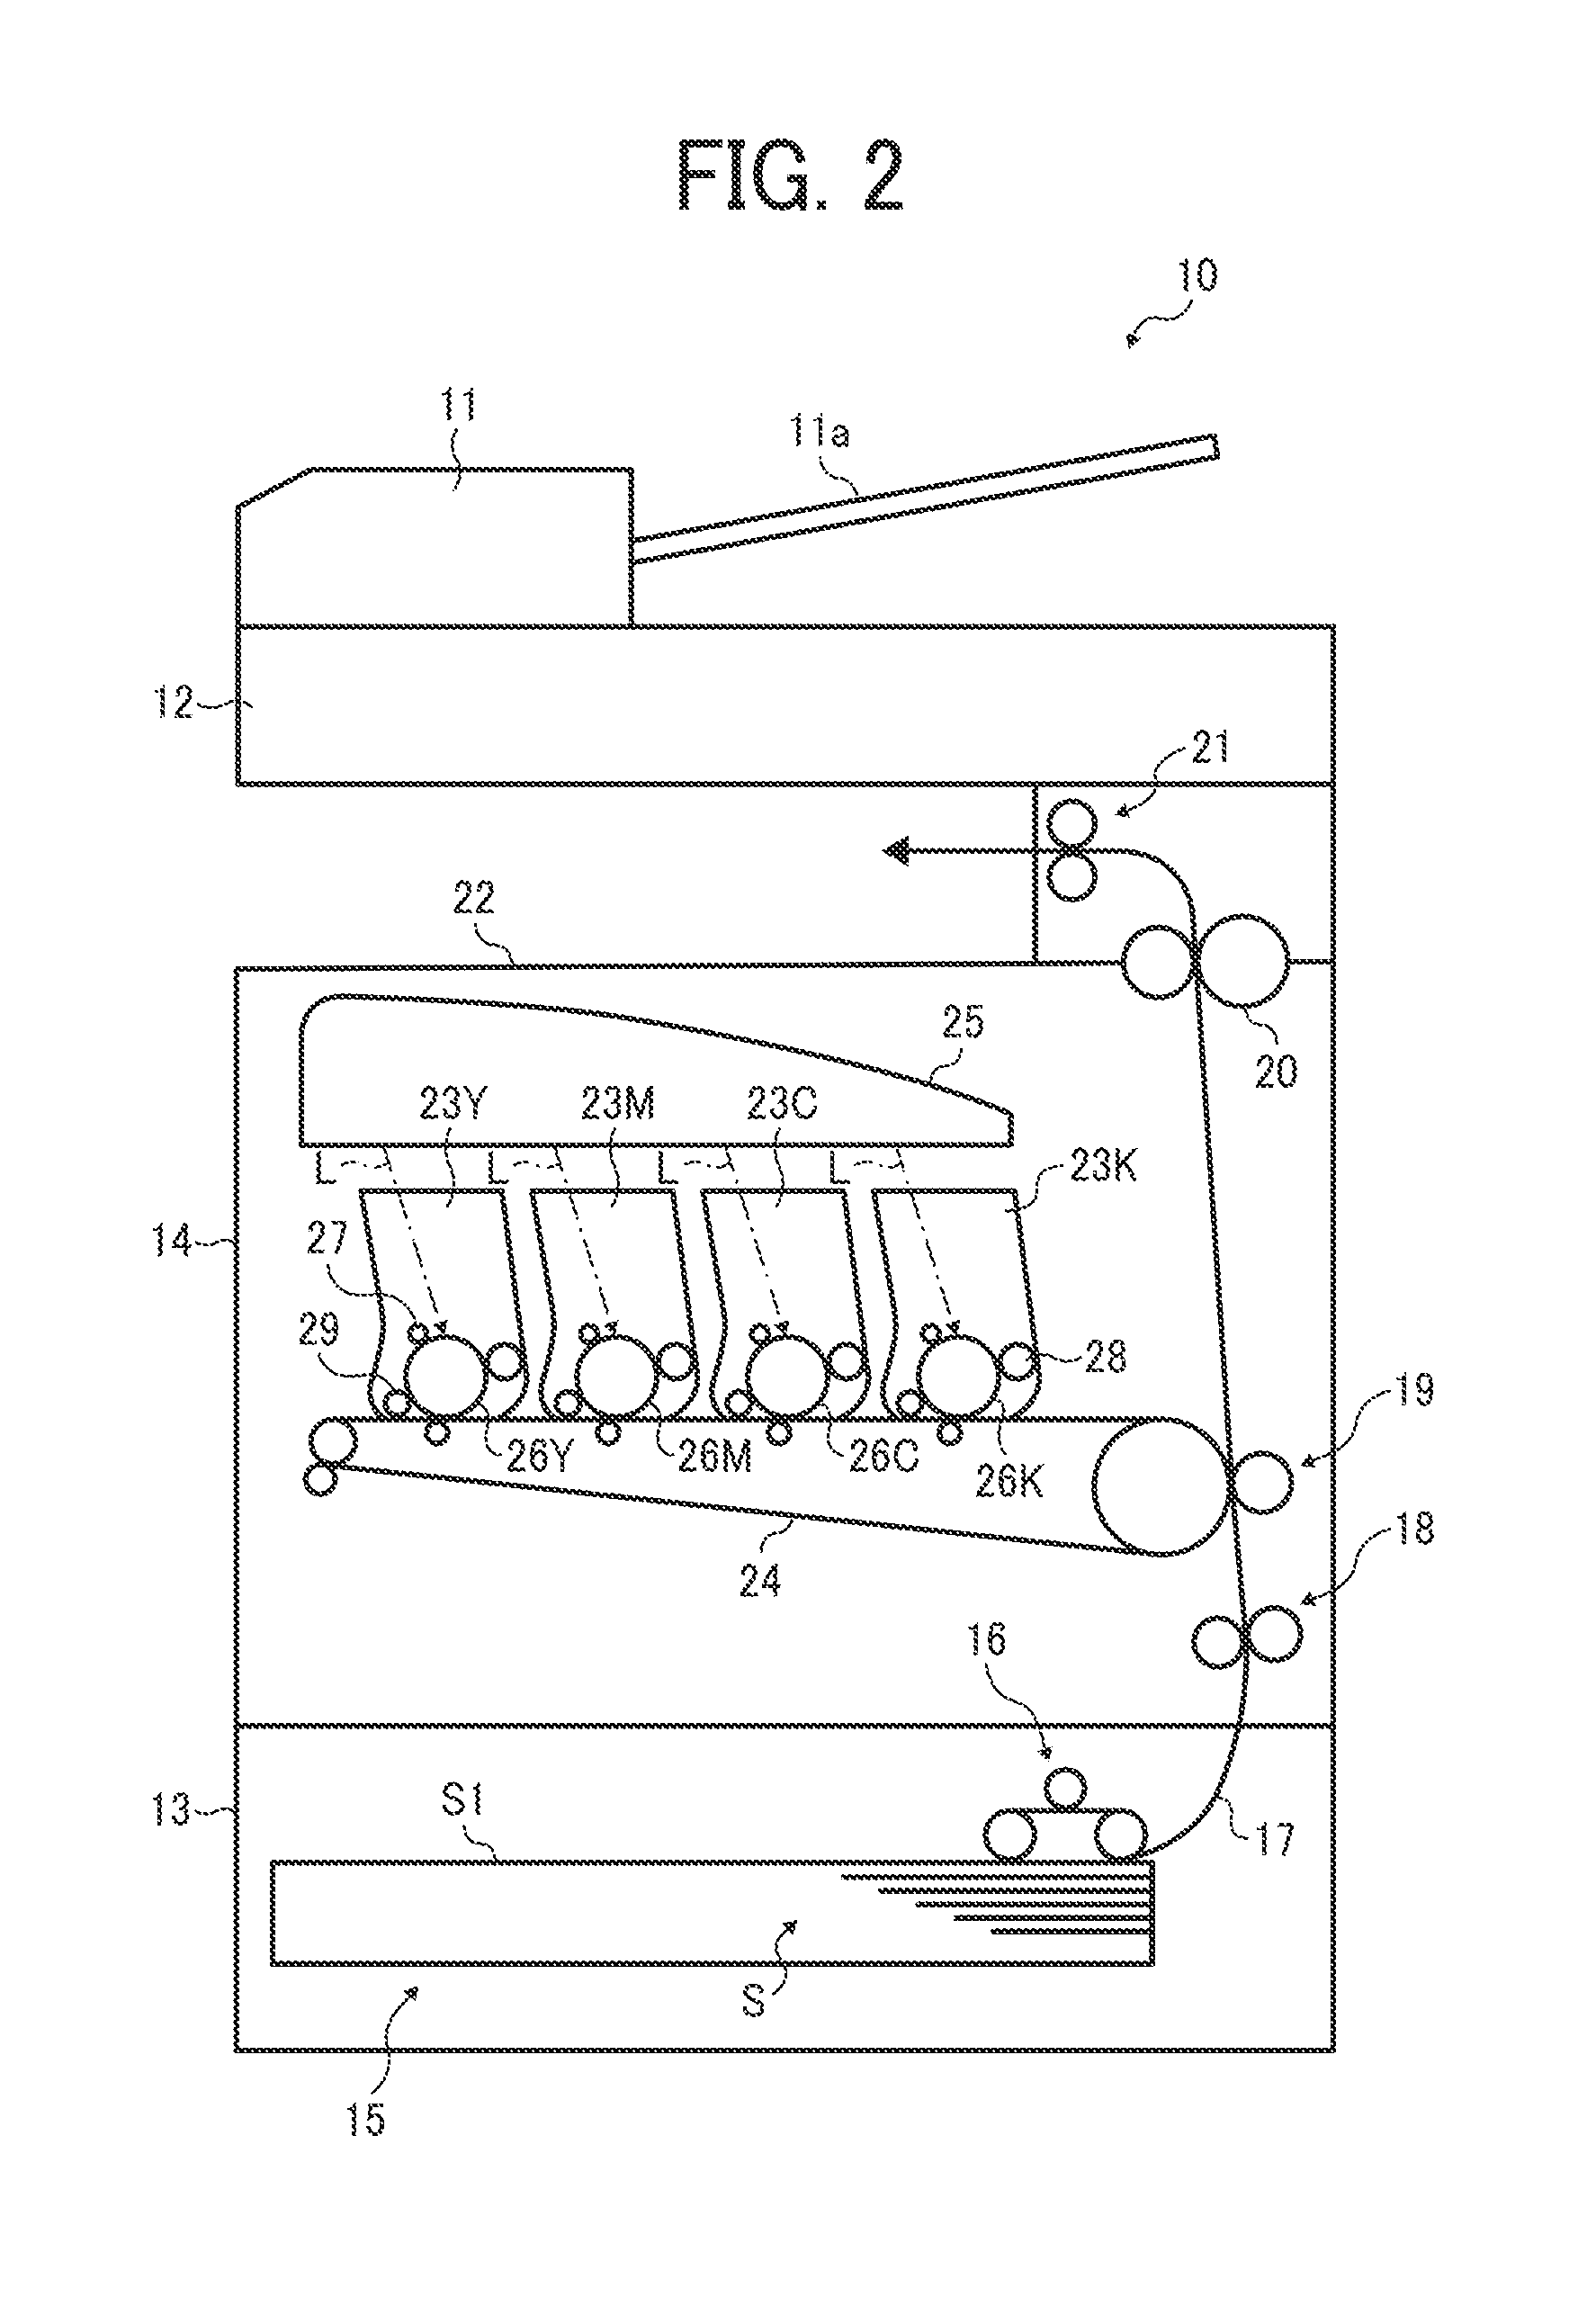 Sheet feeding unit and electrophotographic image forming apparatus